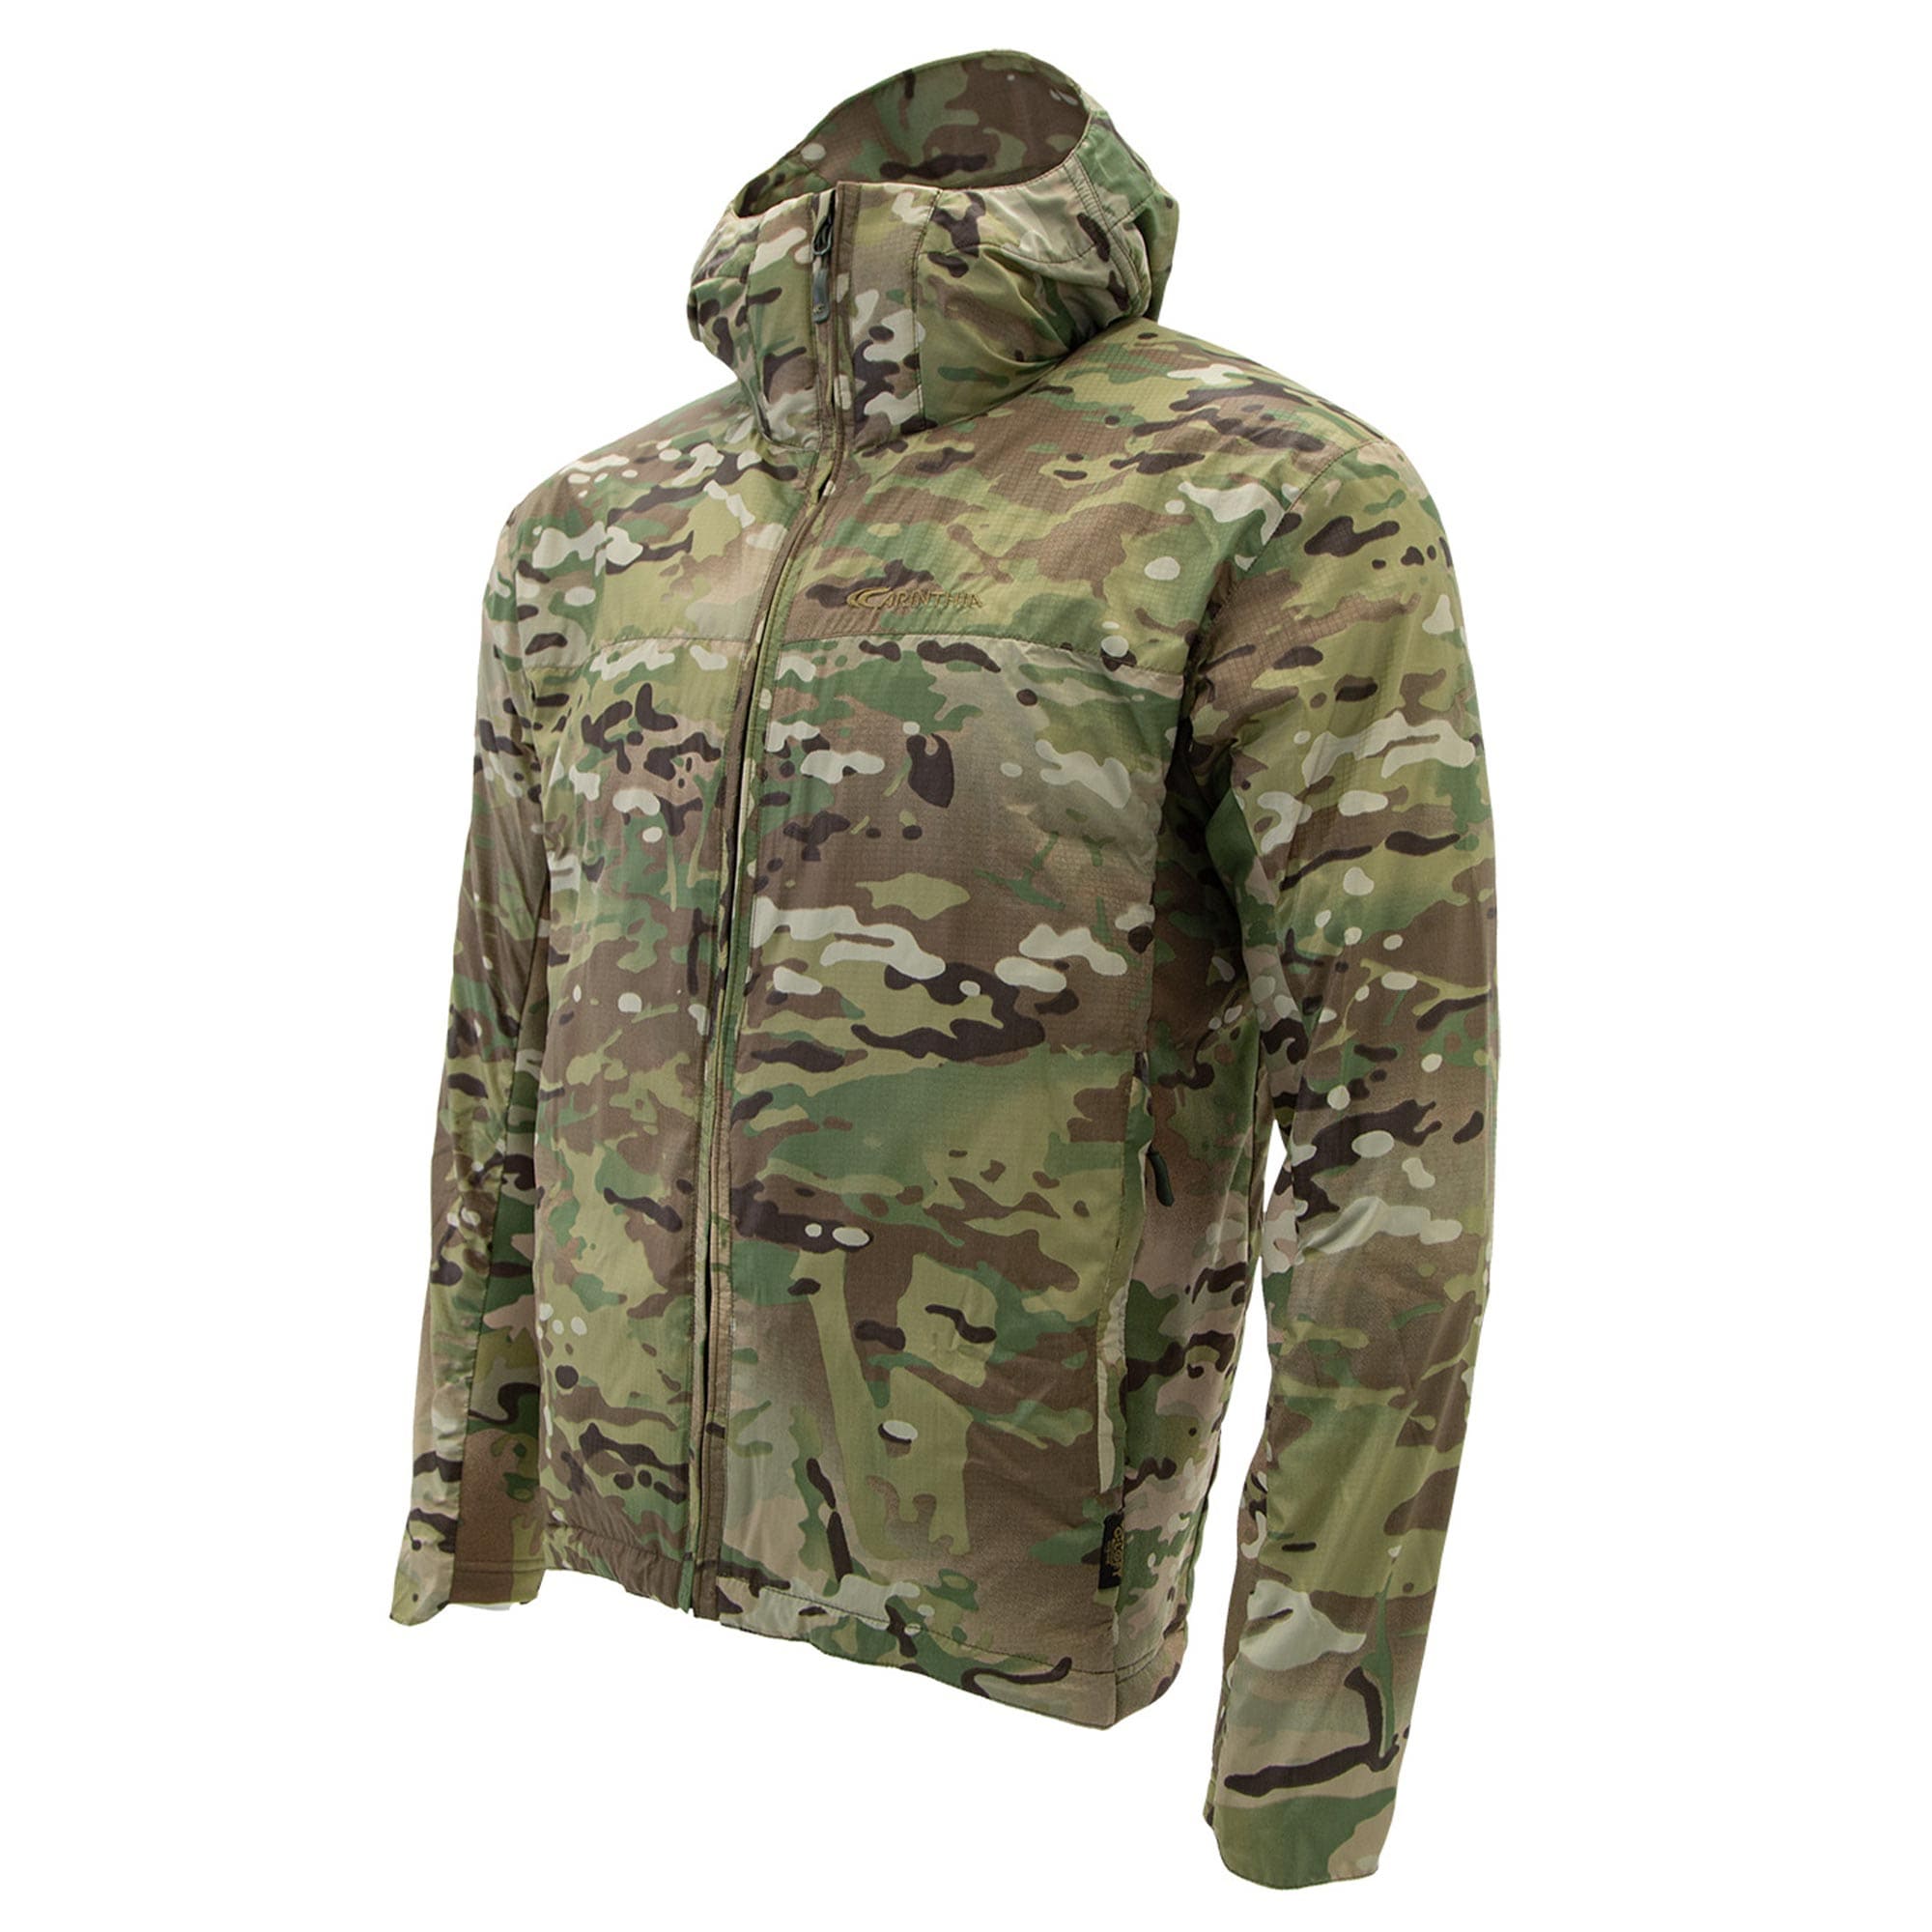 Purchase the Carinthia Jacket TLG multicam by ASMC